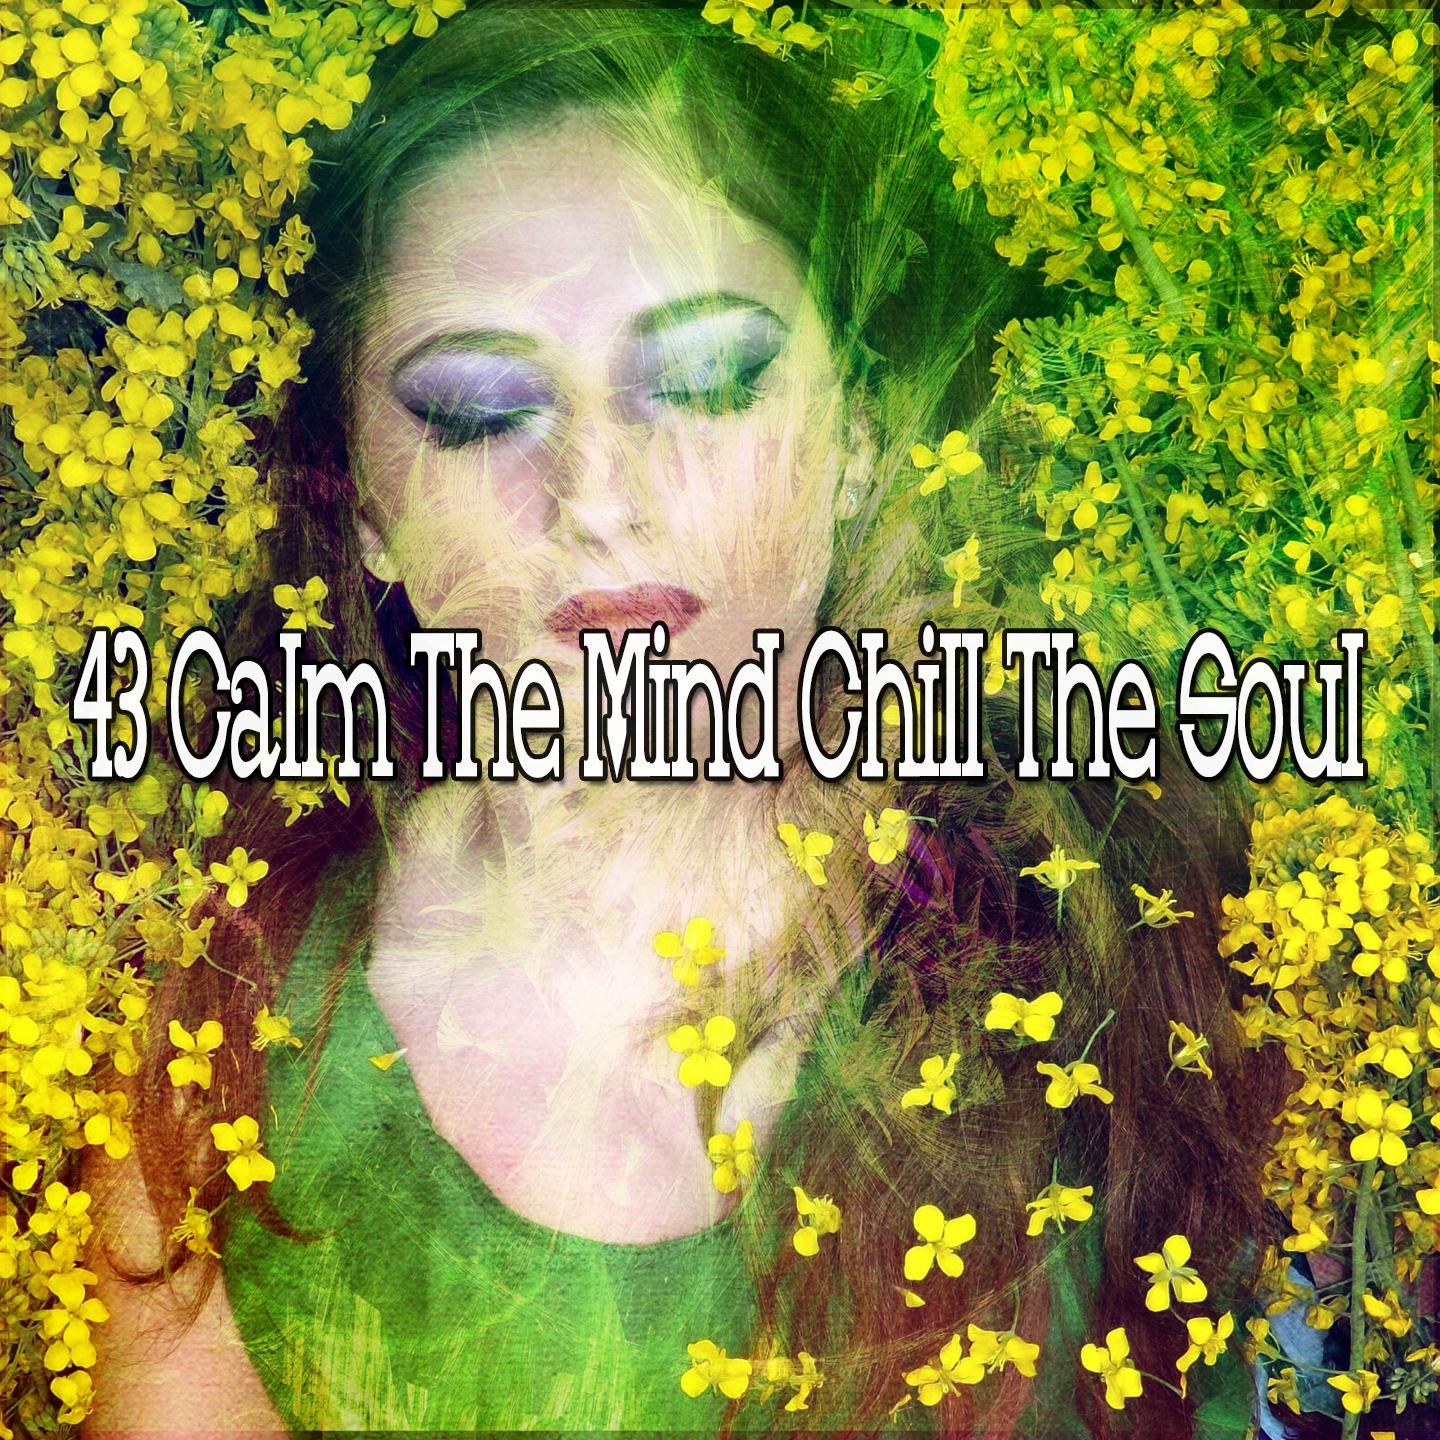 43 Calm the Mind Chill the Soul